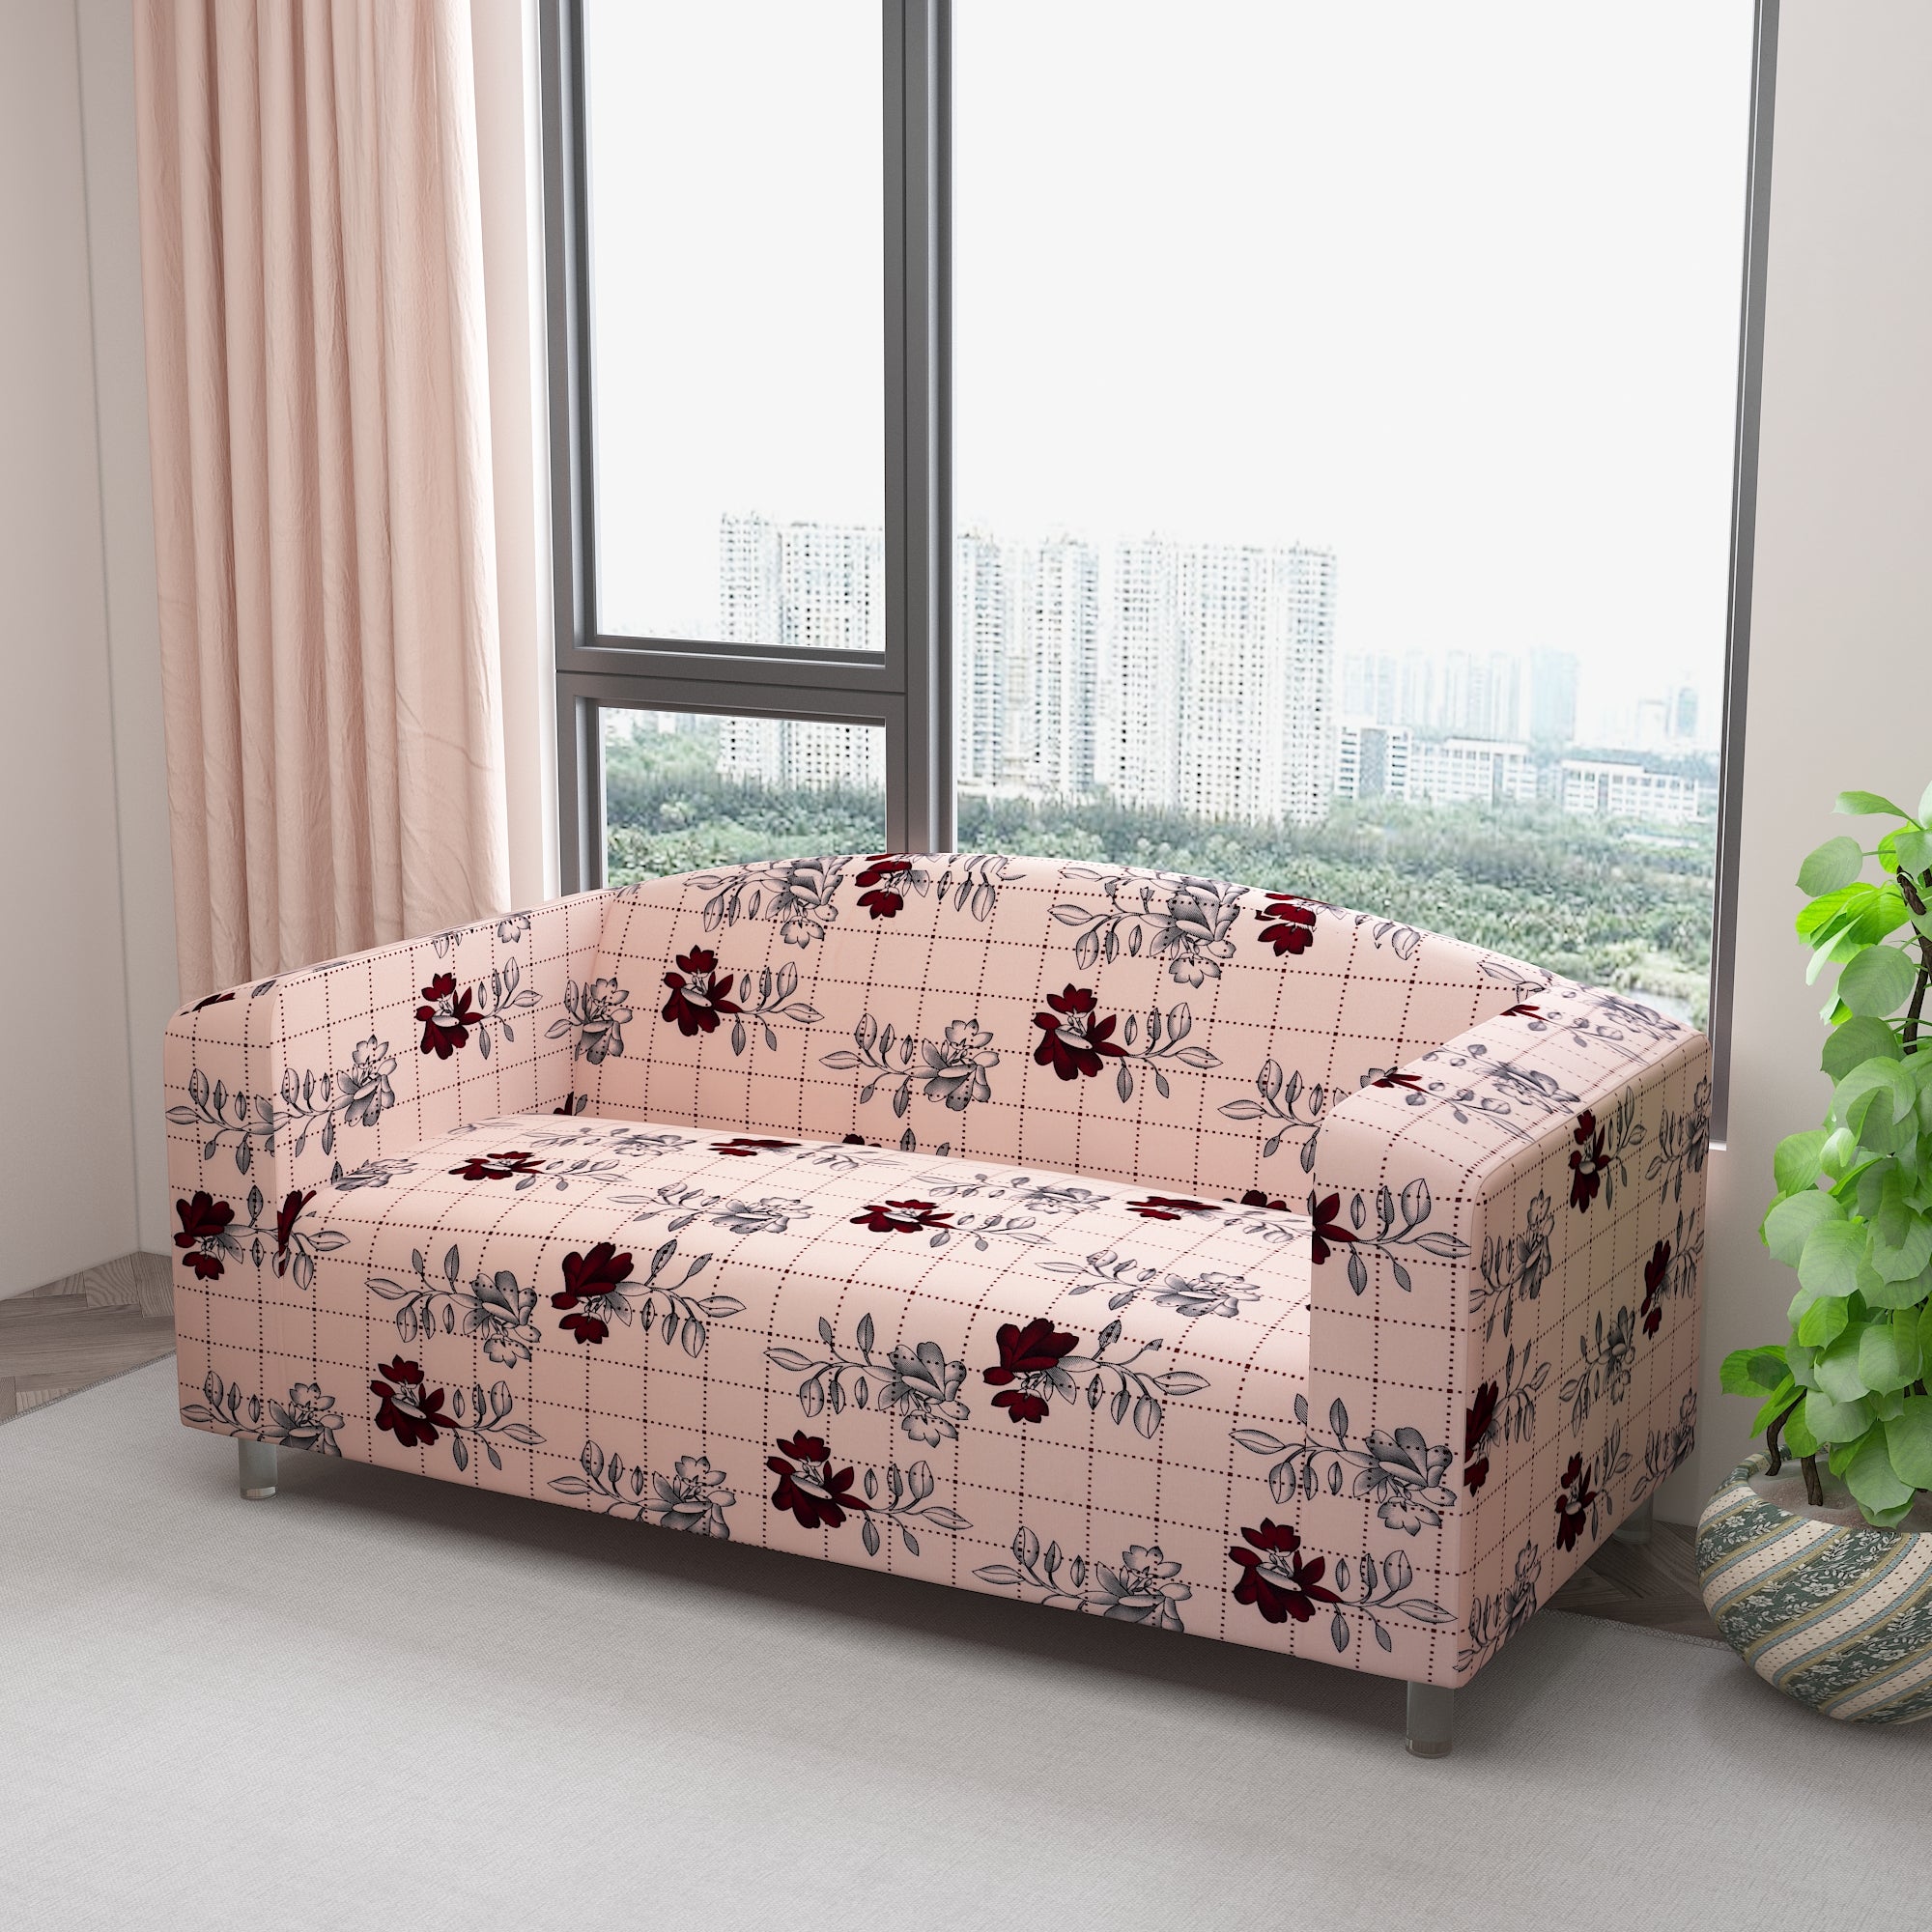 Waterproof Printed Sofa Protector Cover Full Stretchable, SP25 - Dream Care Furnishings Private Limited